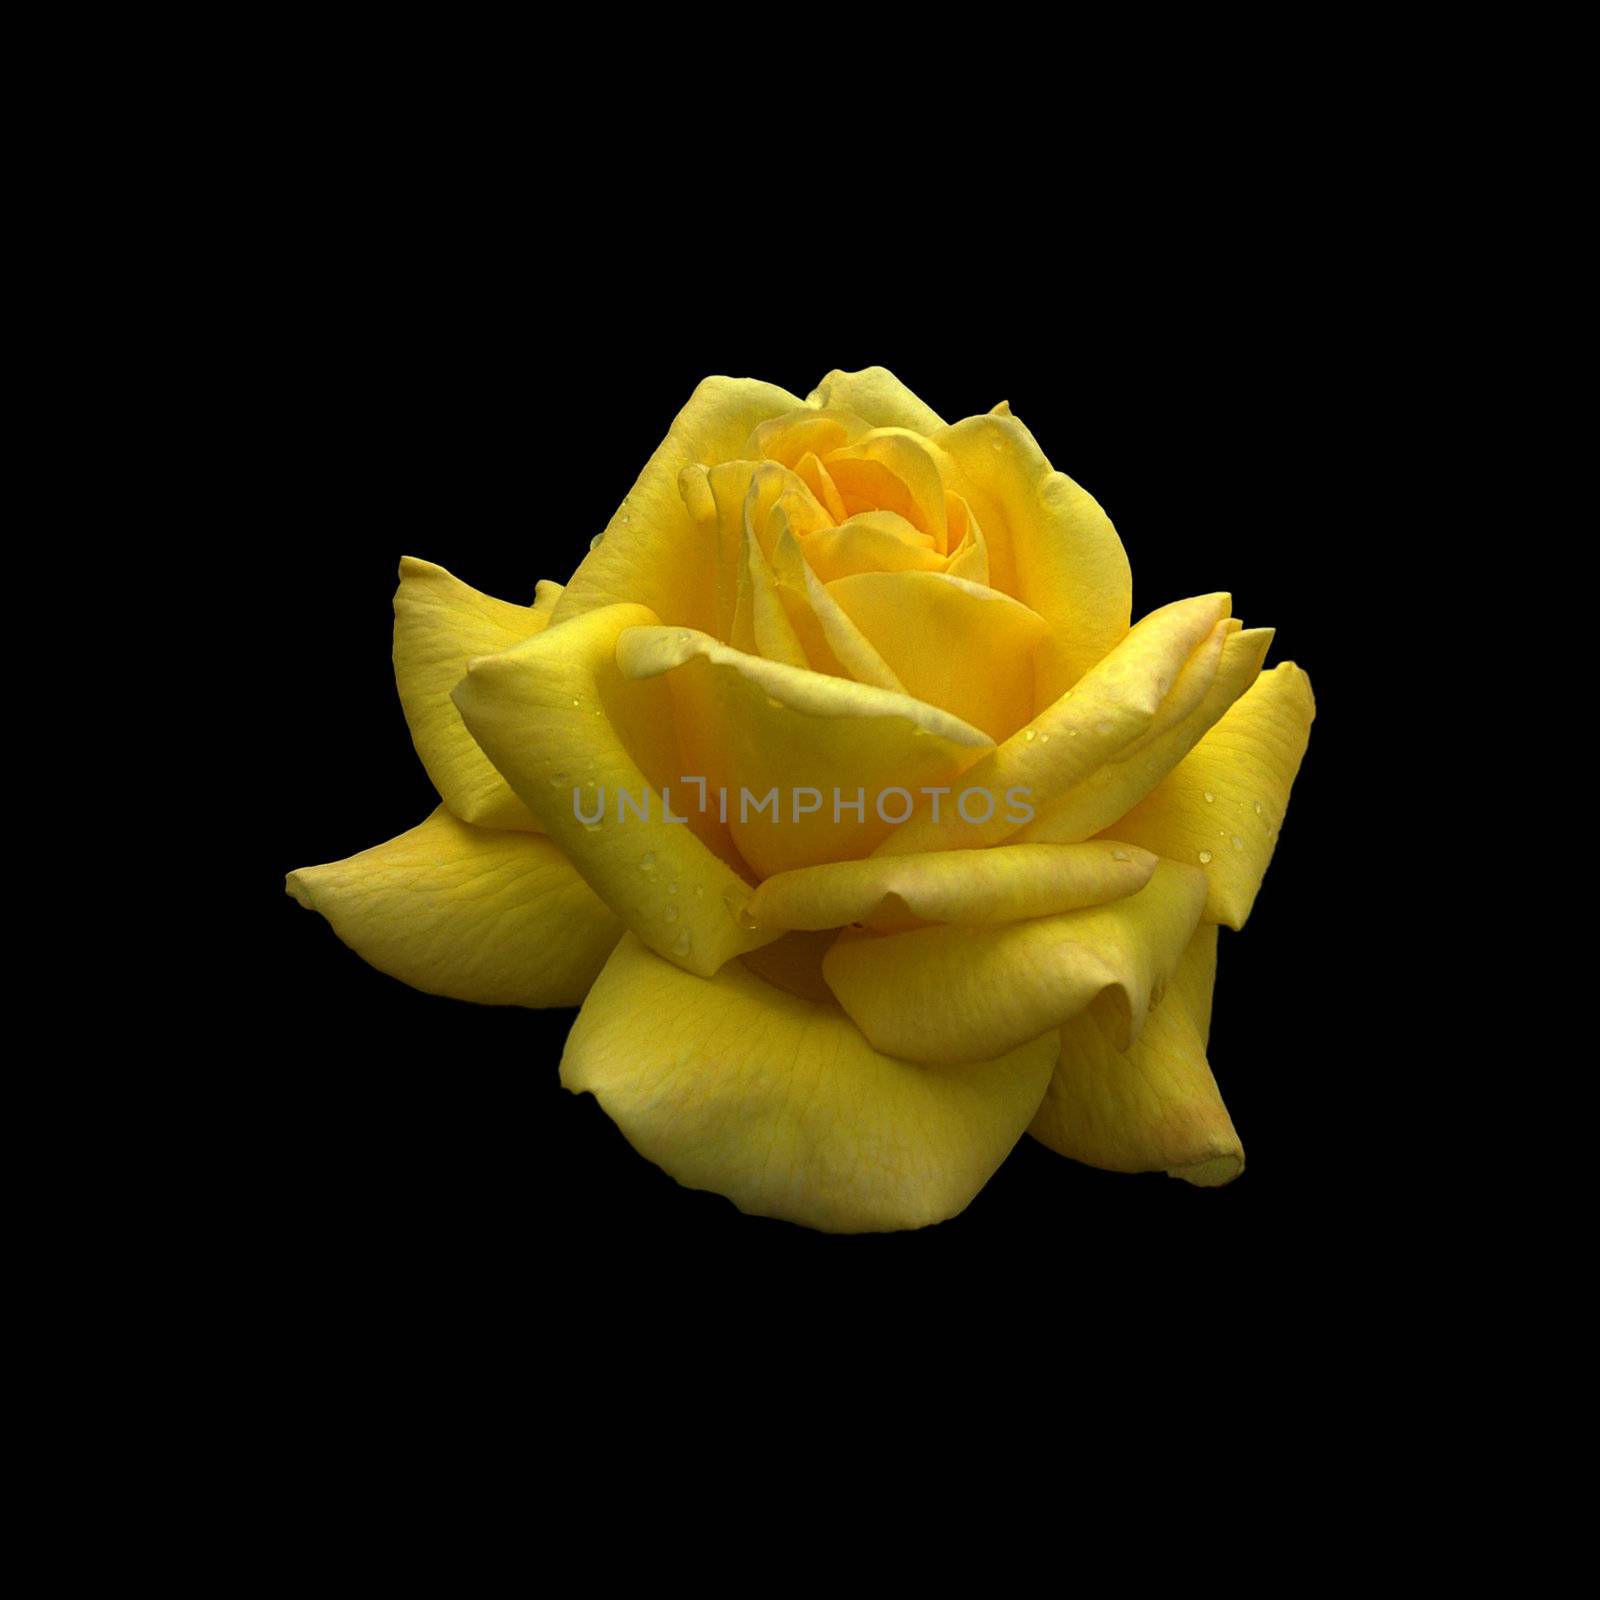 Hybrid Tea Rose "Arthur Bell" with clipping path